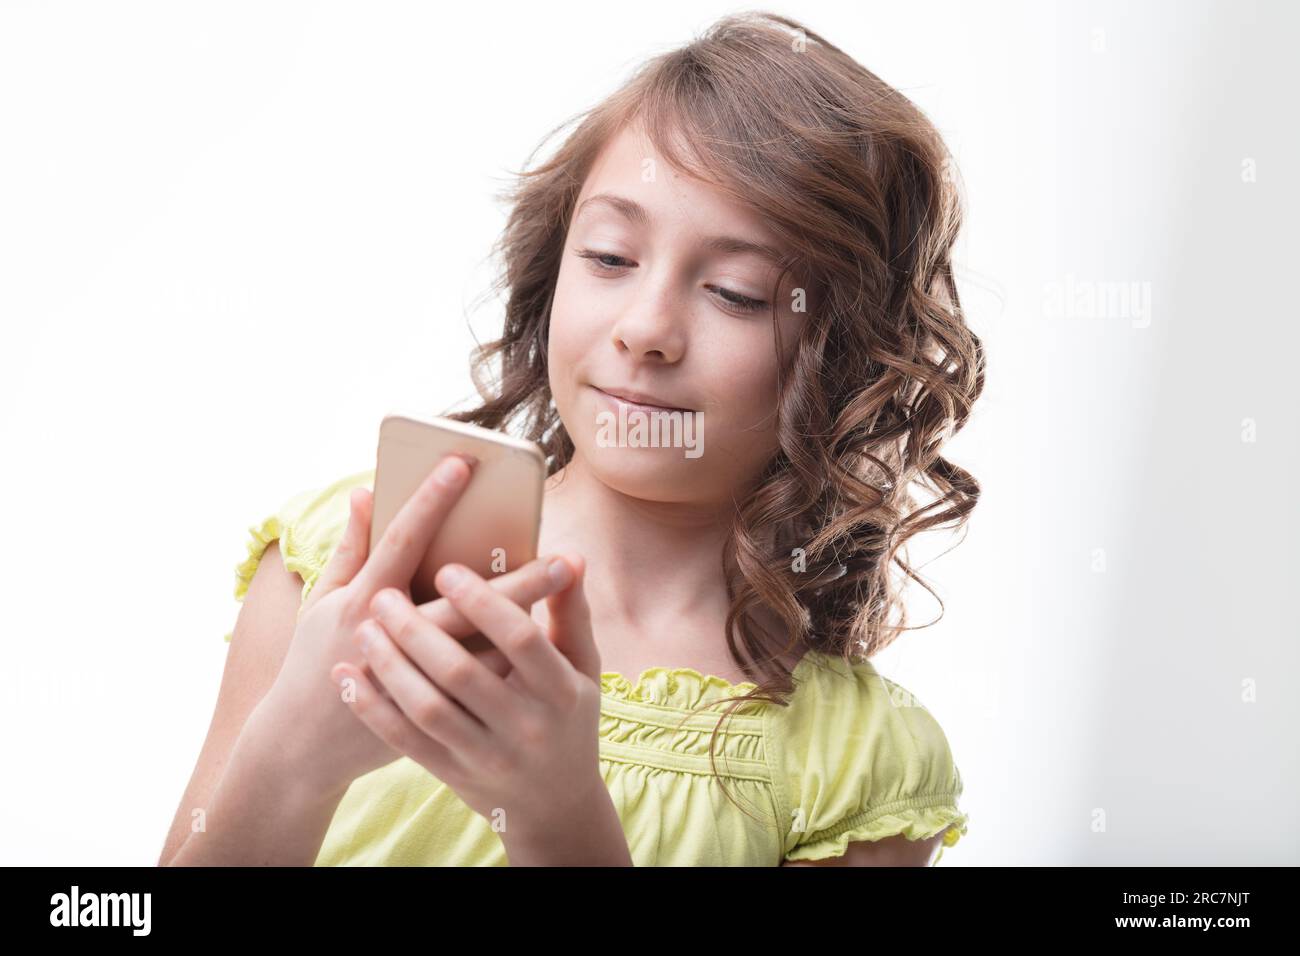 Competently using a smartphone, a curly-haired girl in green epitomizes the digital generation Stock Photo